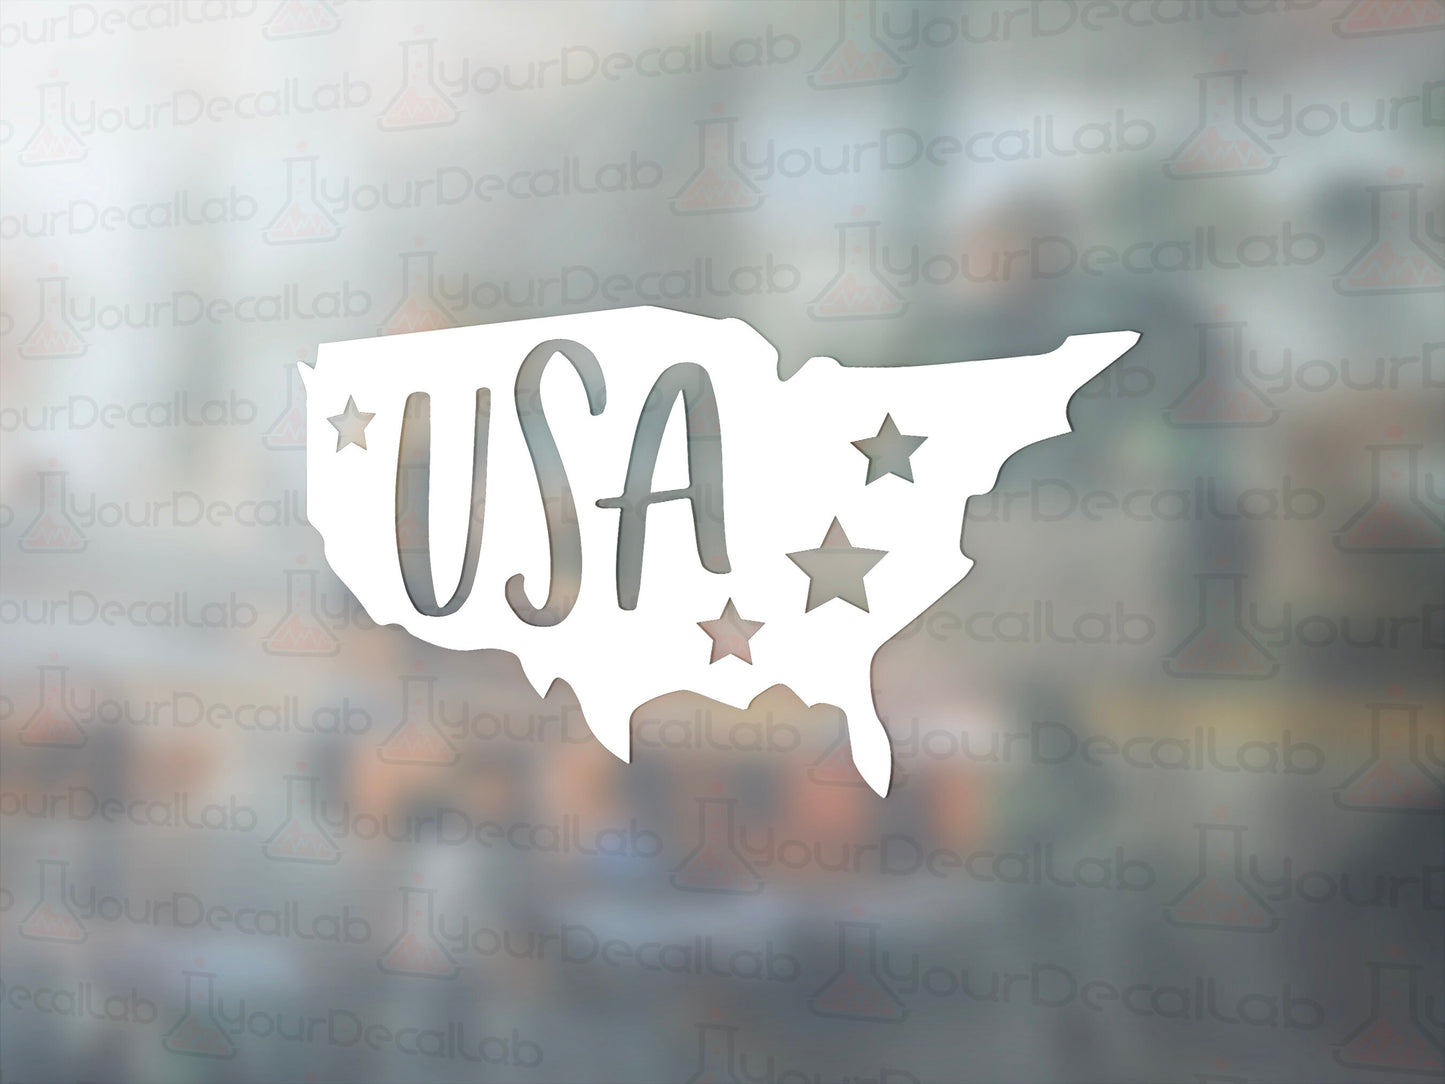 U.S.A. Decal - Many Colors & Sizes